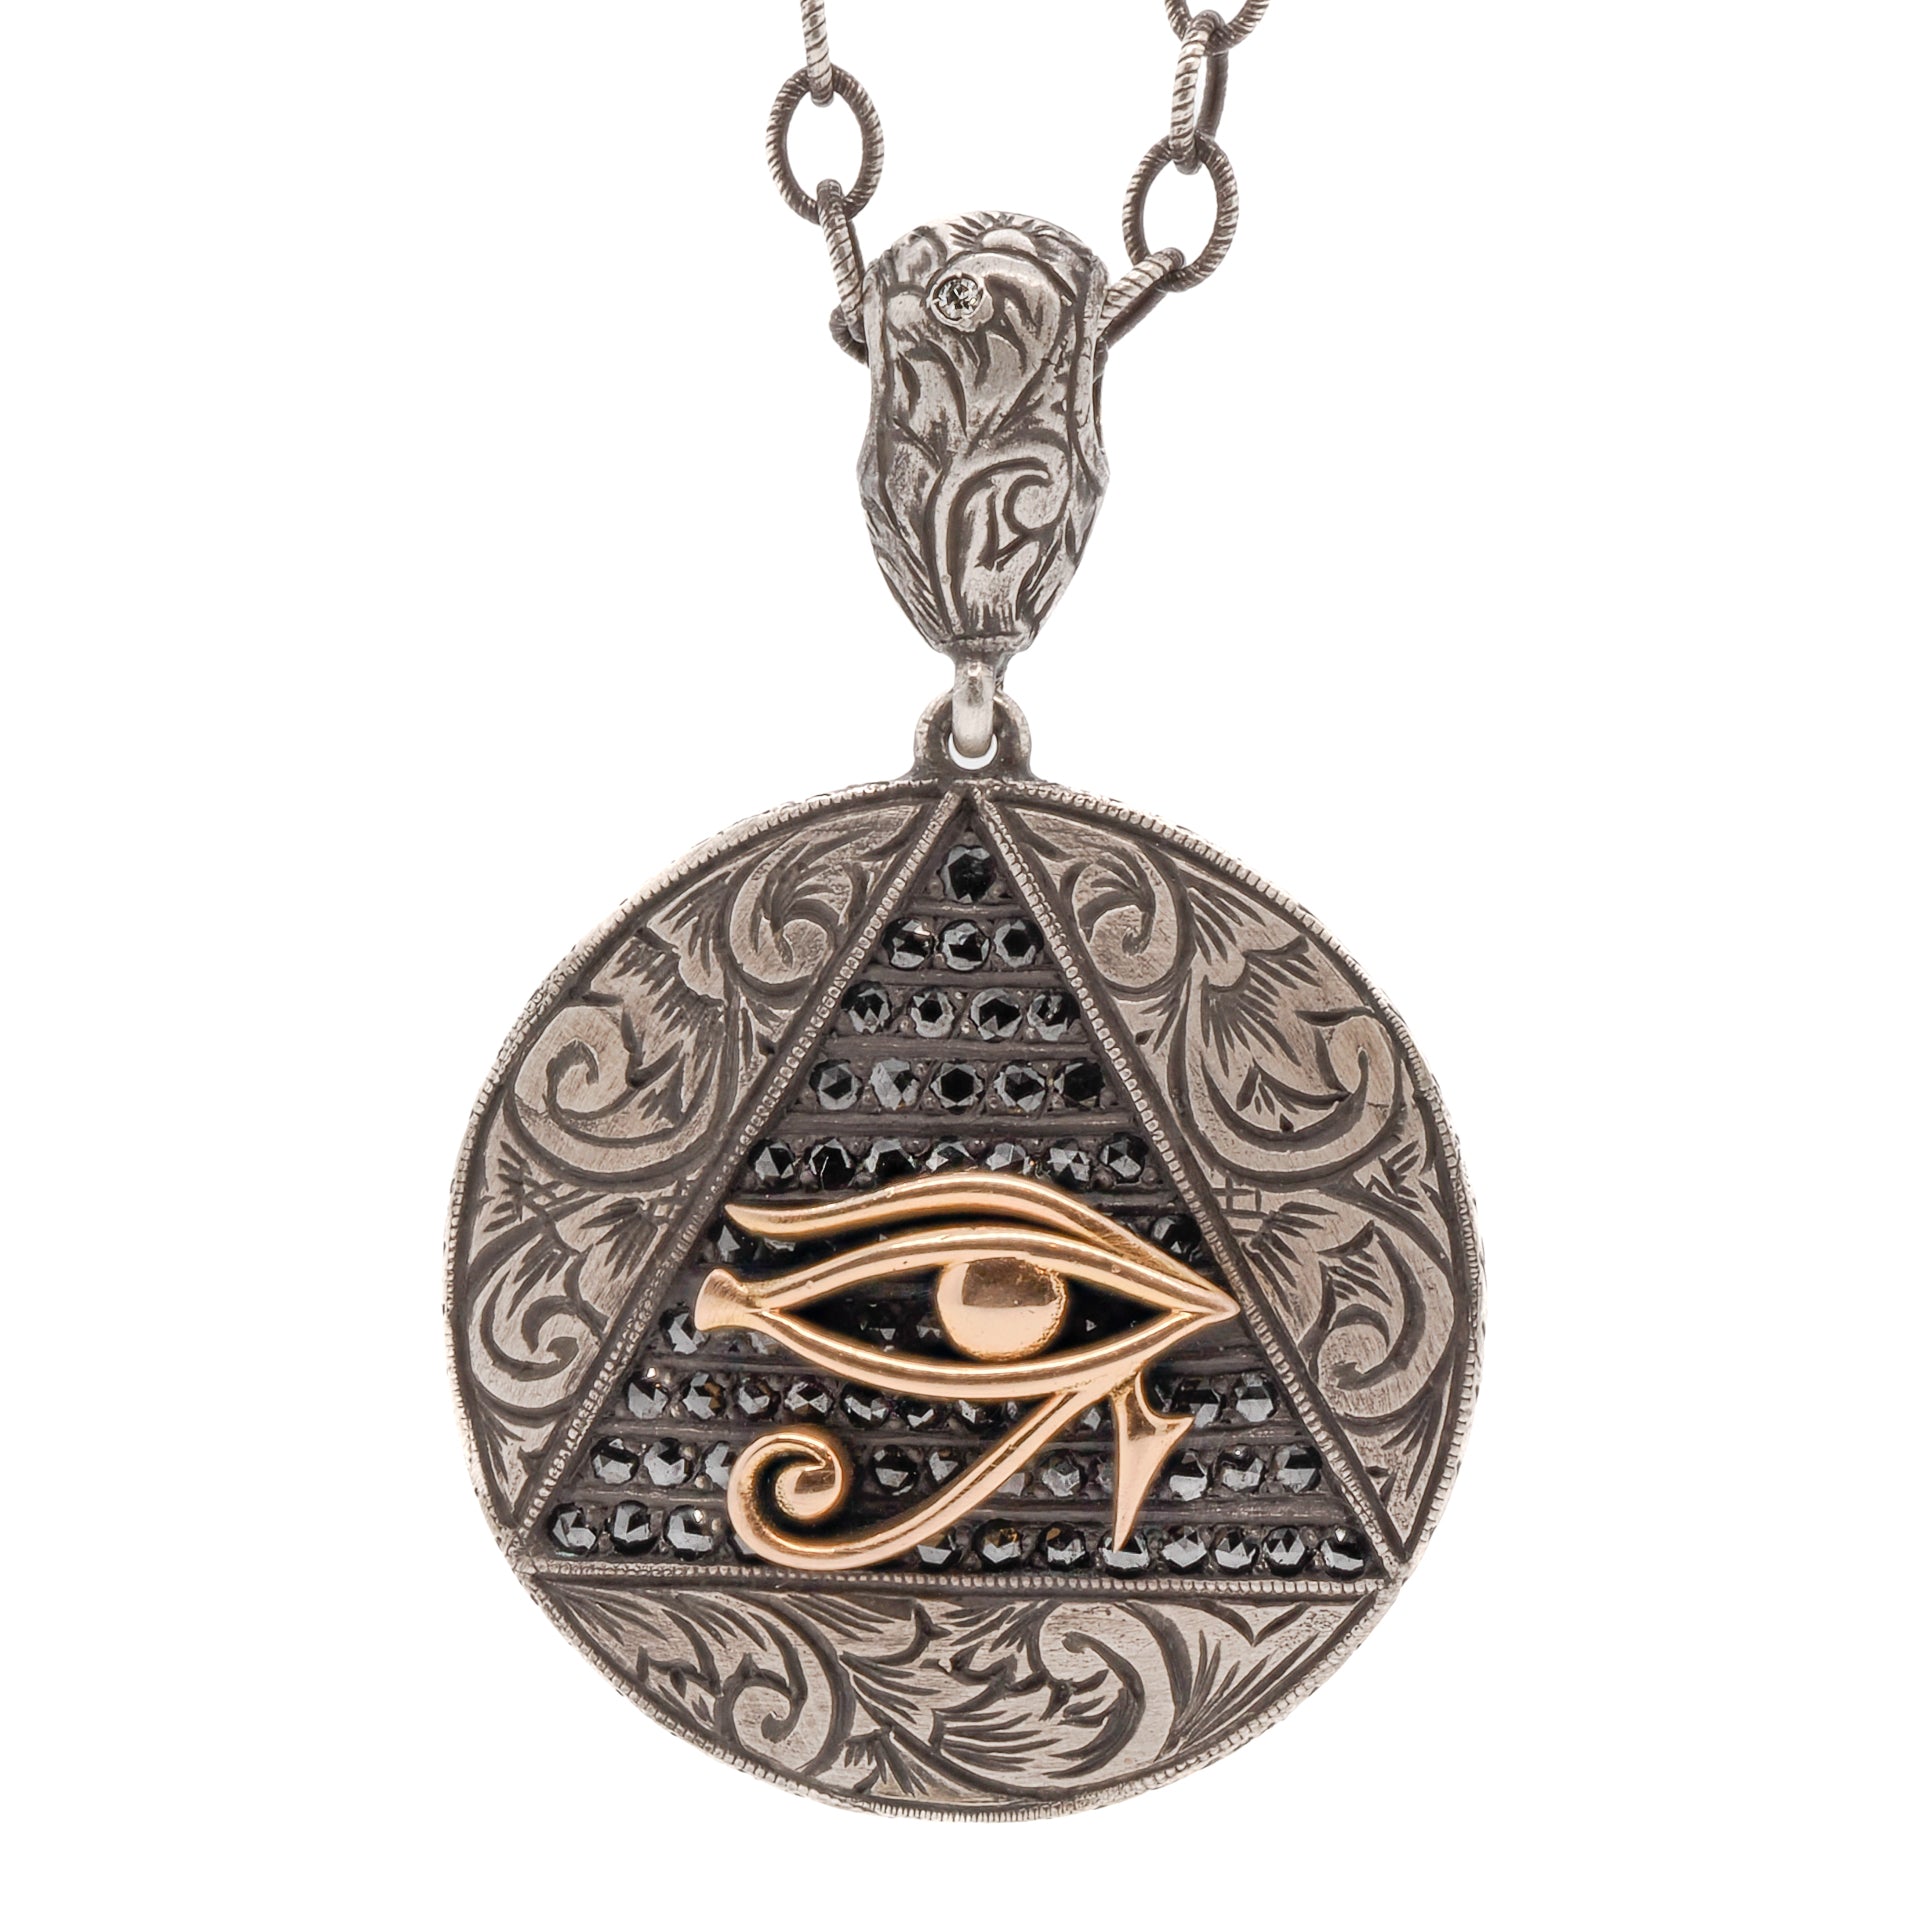 The All Seeing Eye Necklace - A Unique and Handcrafted Amulet Necklace from Ebru Jewelry's Fine Jewelry Series